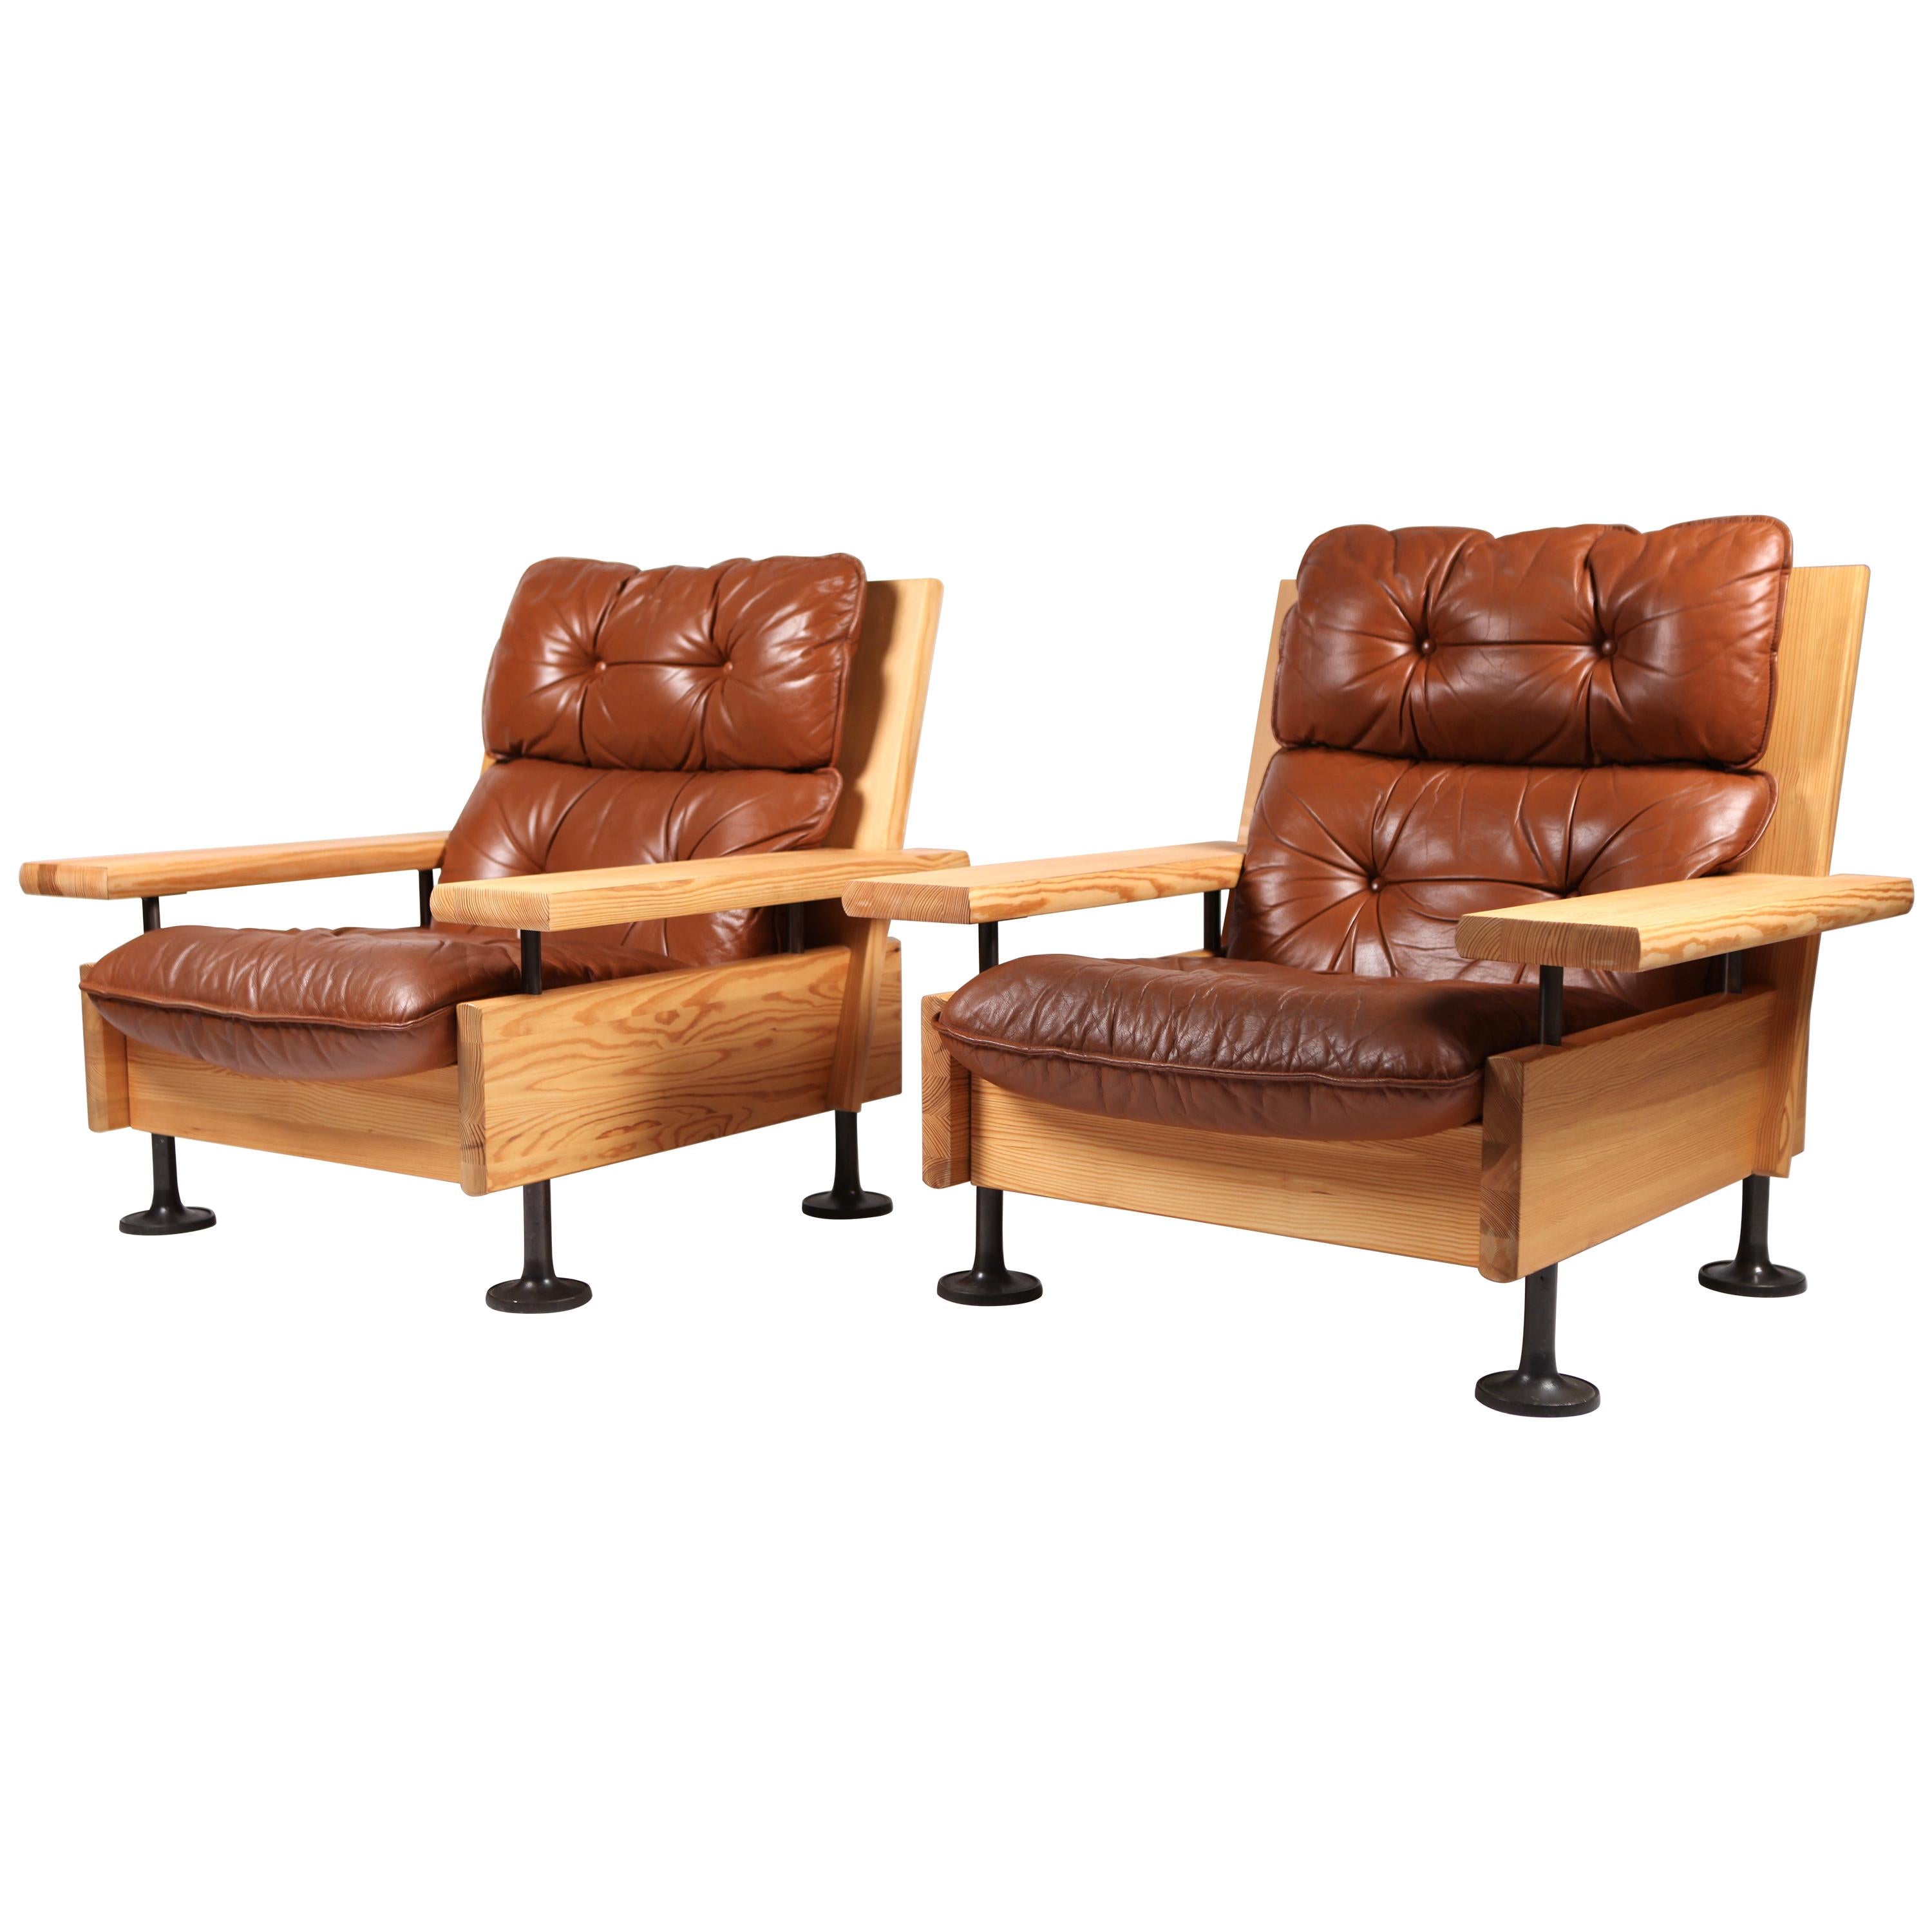 Hannu Jyräs, Pair of Unique Easy Armchairs in Oregon Pine and Leather, 1970s